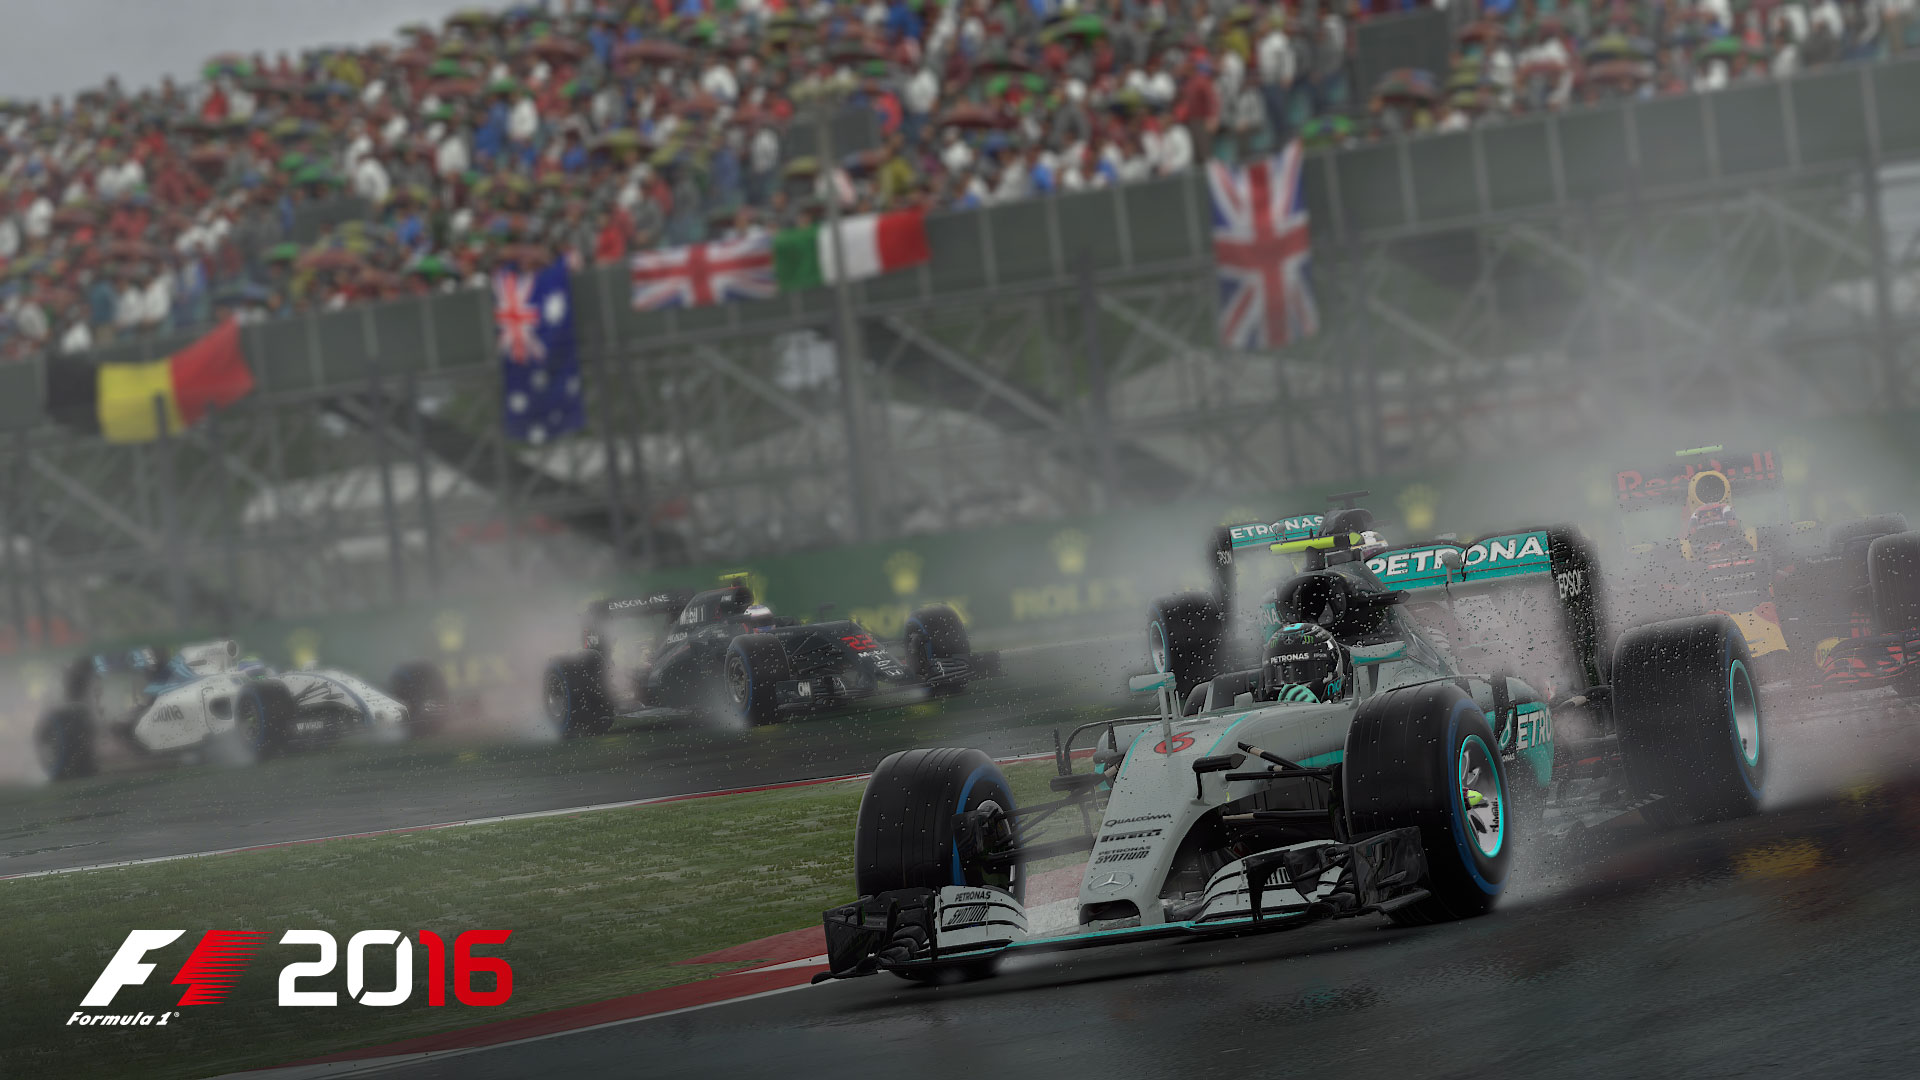 Video Game F1 2016 HD Wallpaper | Background Image